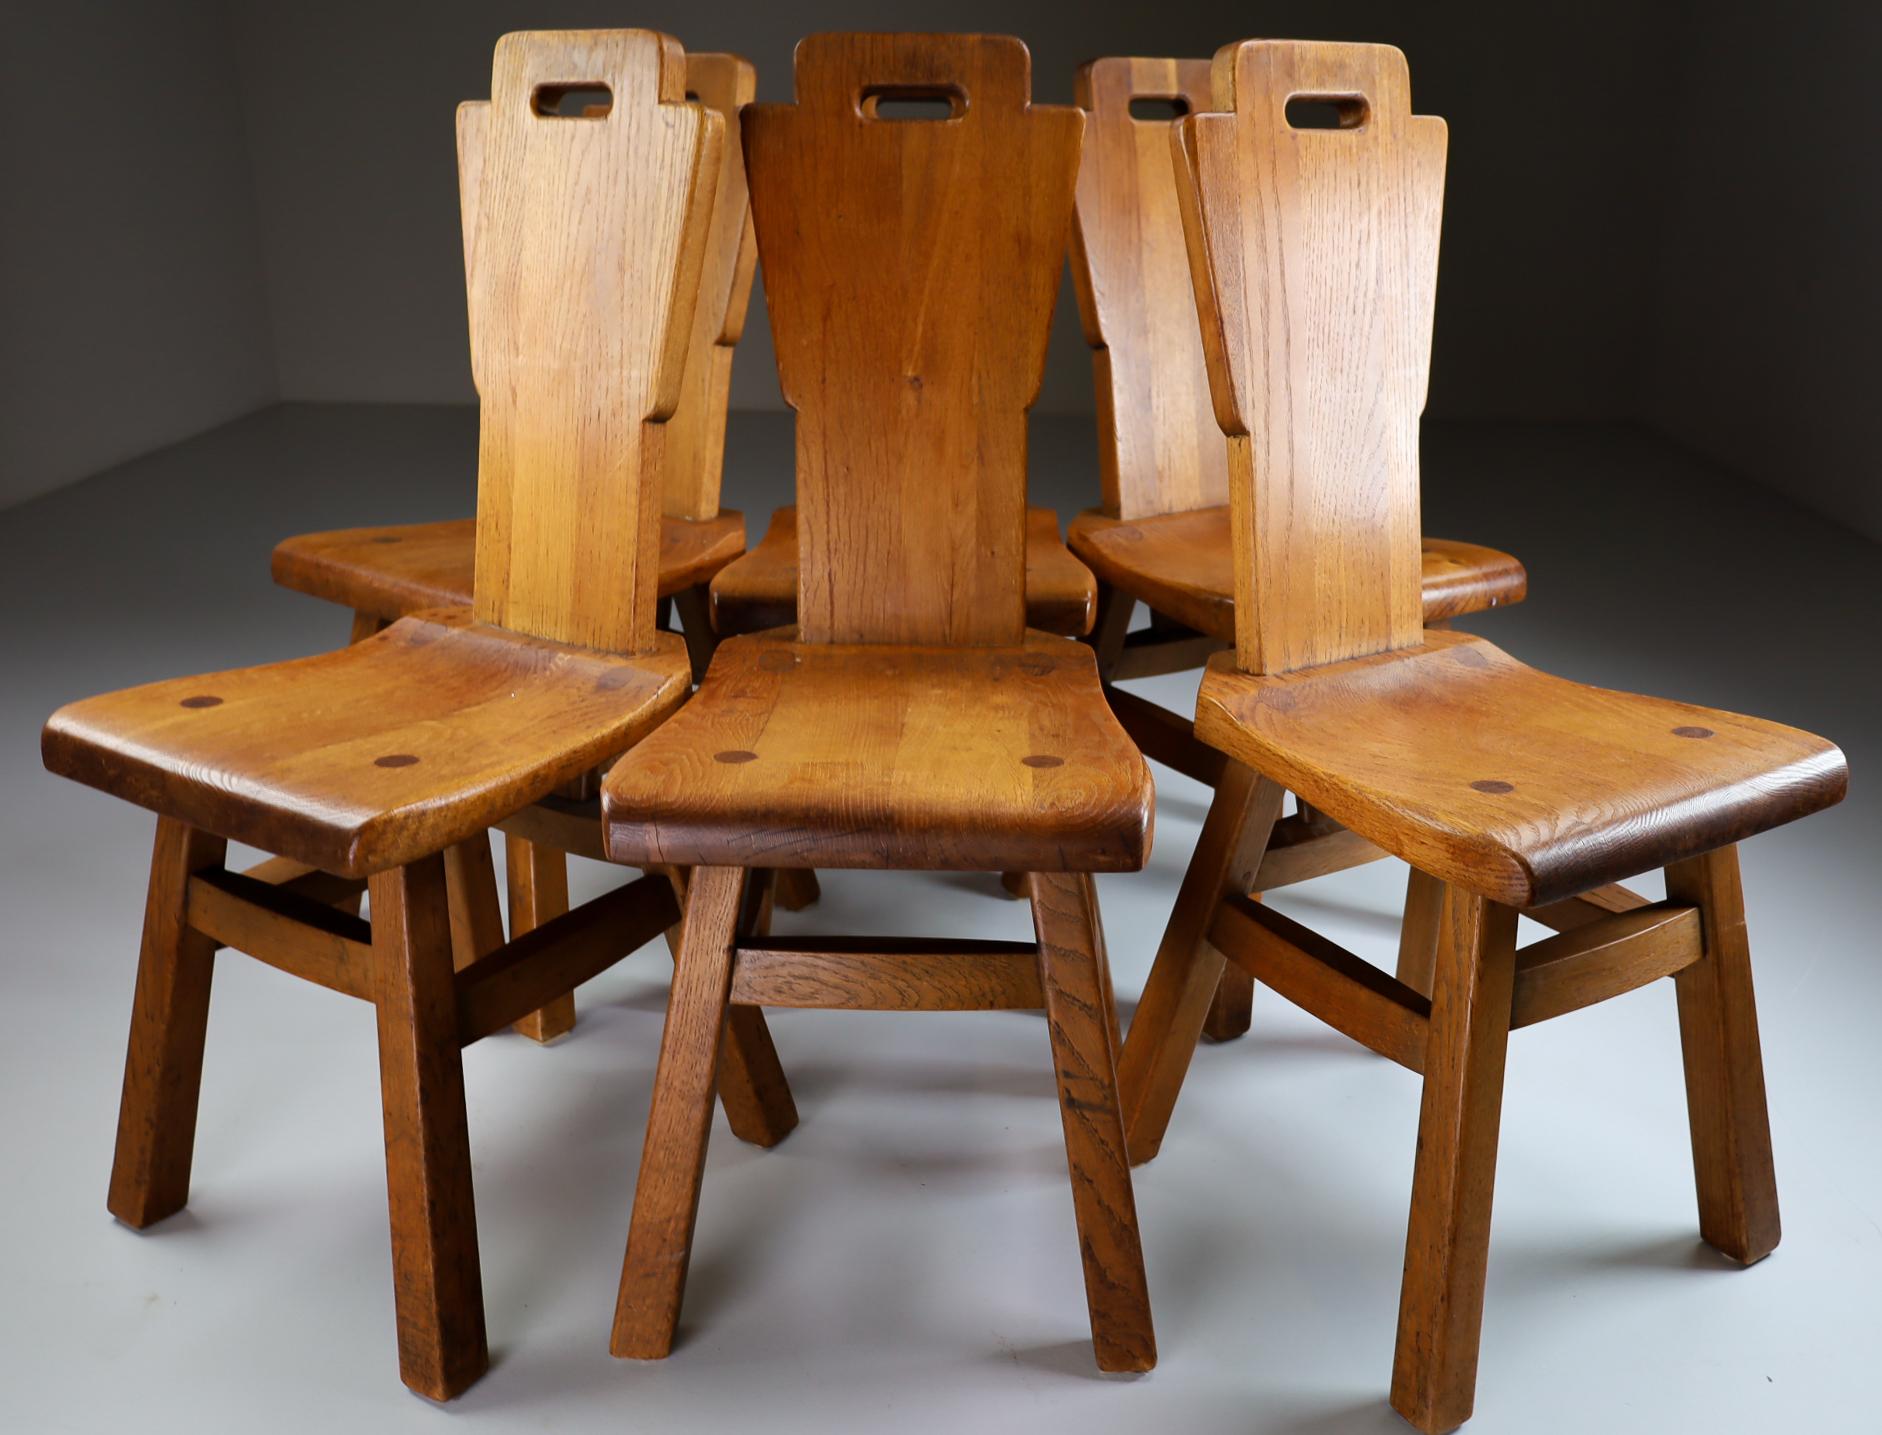 Set/6 solid oak dinning chairs, France 1950s. These chairs are made of oak and crafted by hand. The craftsmanship is still visible, they are made of solid oak wood and constructed with visible joints. Very nice original patina.